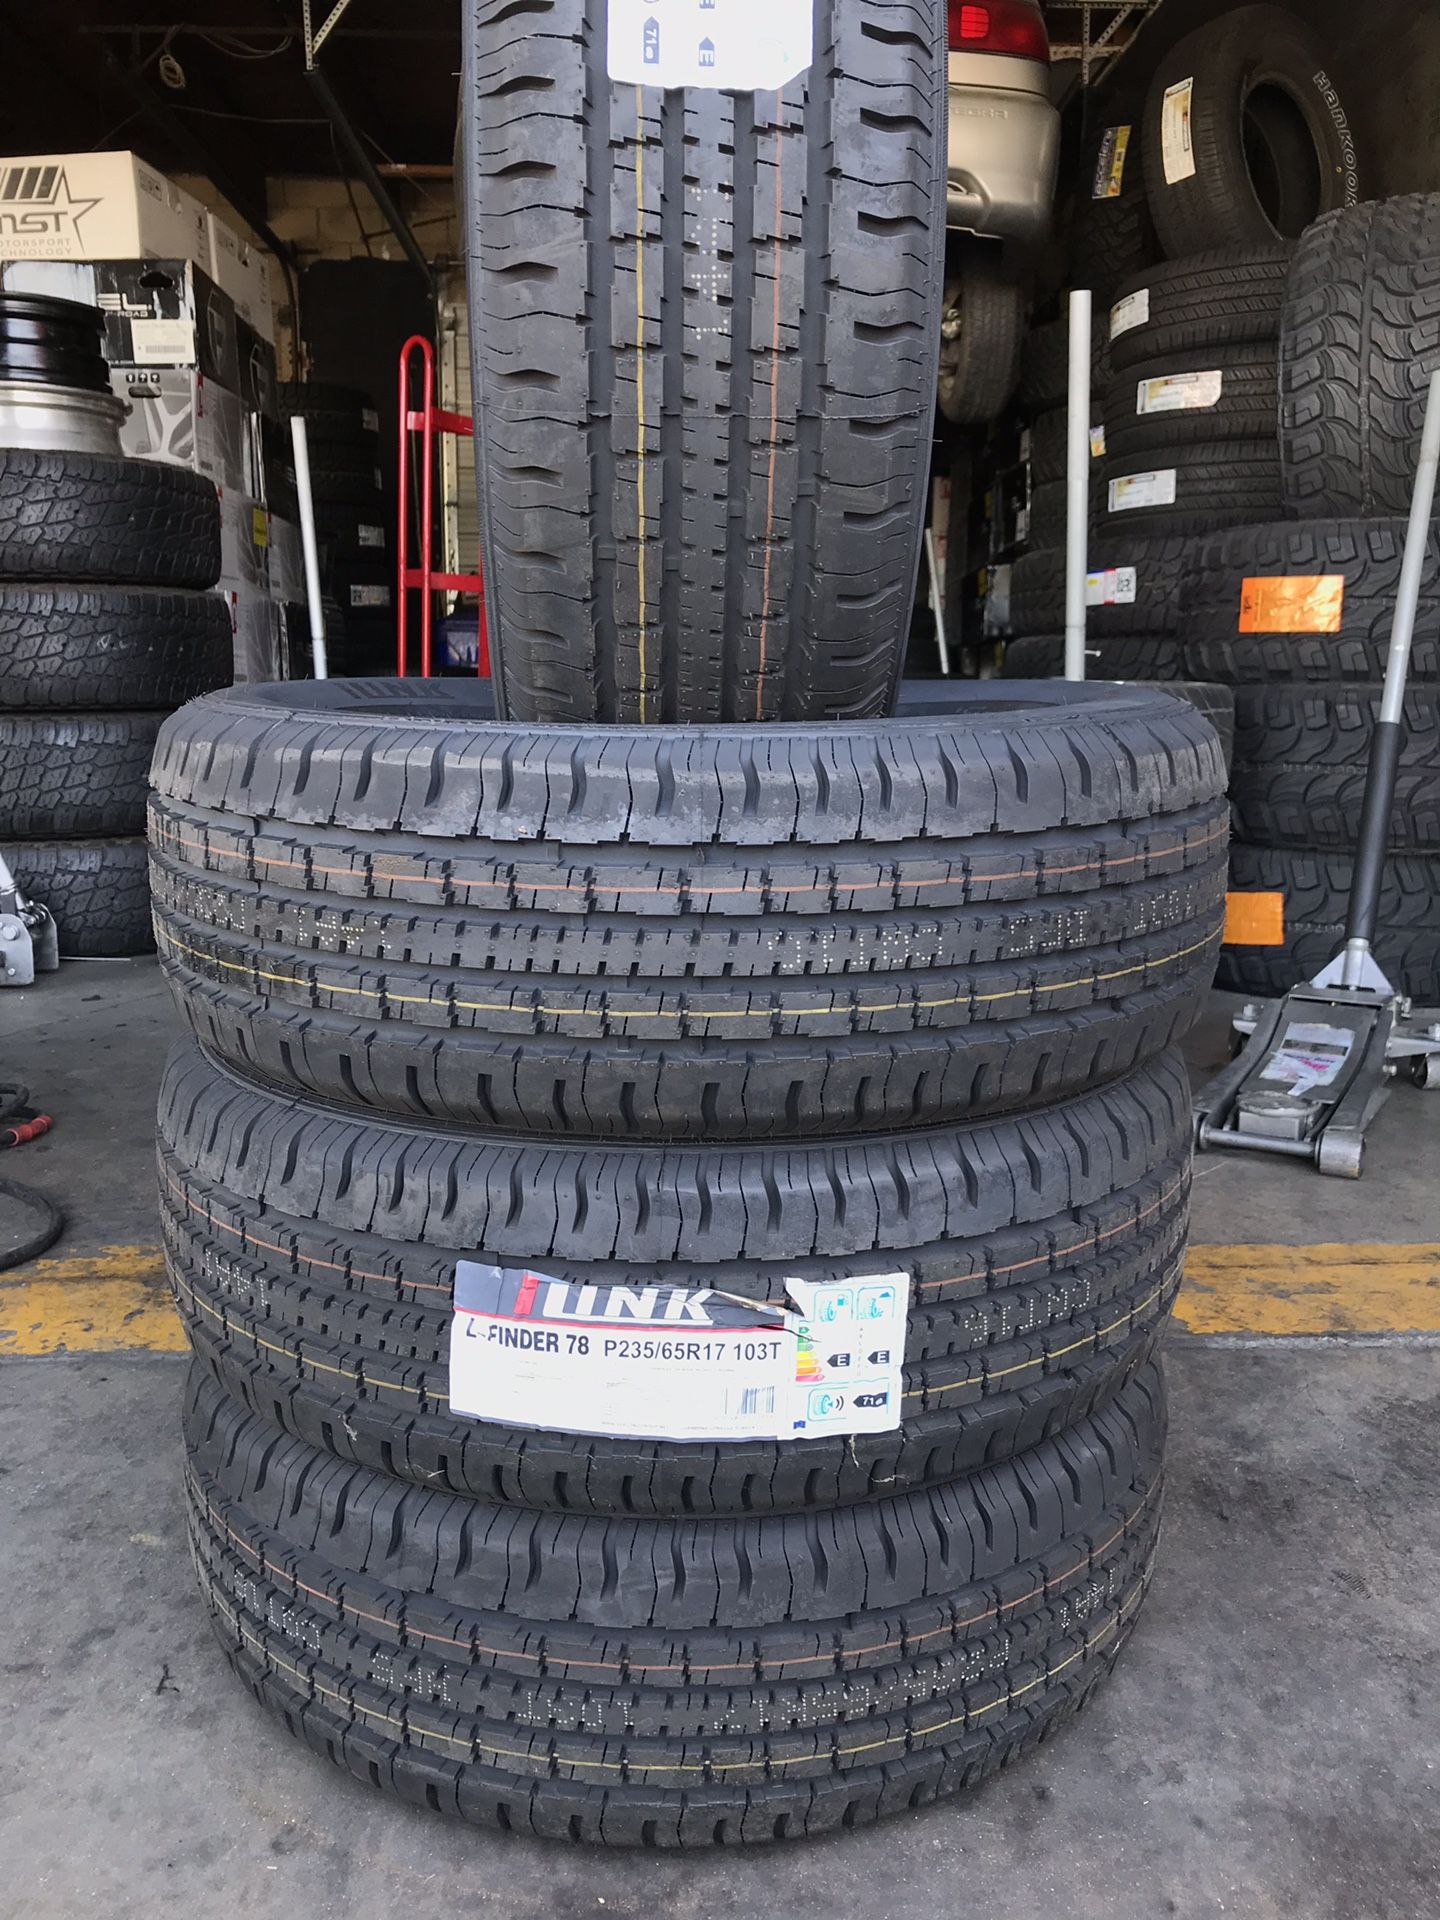 BRAND NEW SET OF TIRES 235/65r17 235/65/17